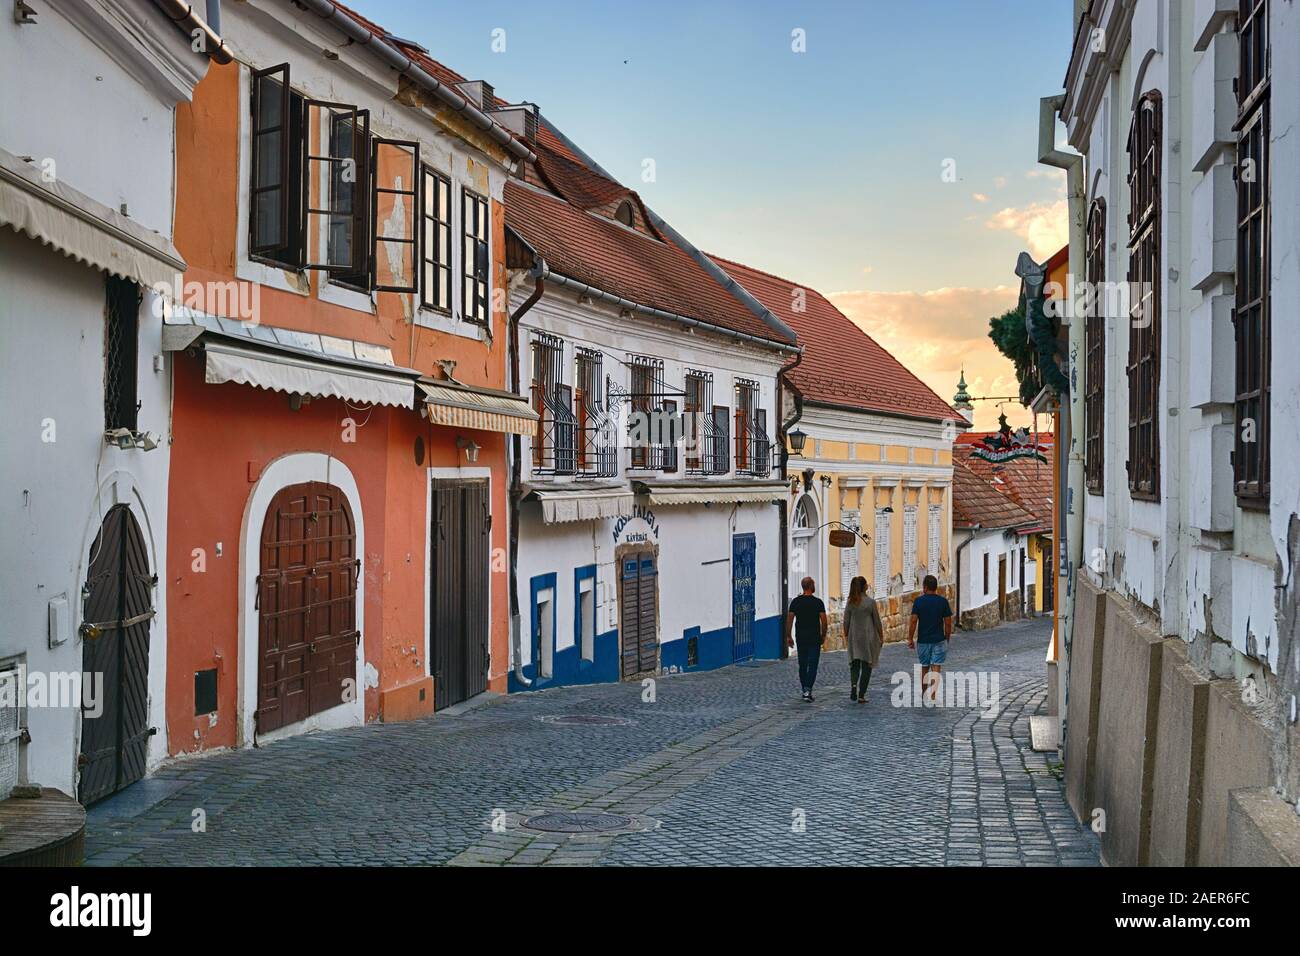 Old street with walking figures in Szentendre, Hungary Stock Photo